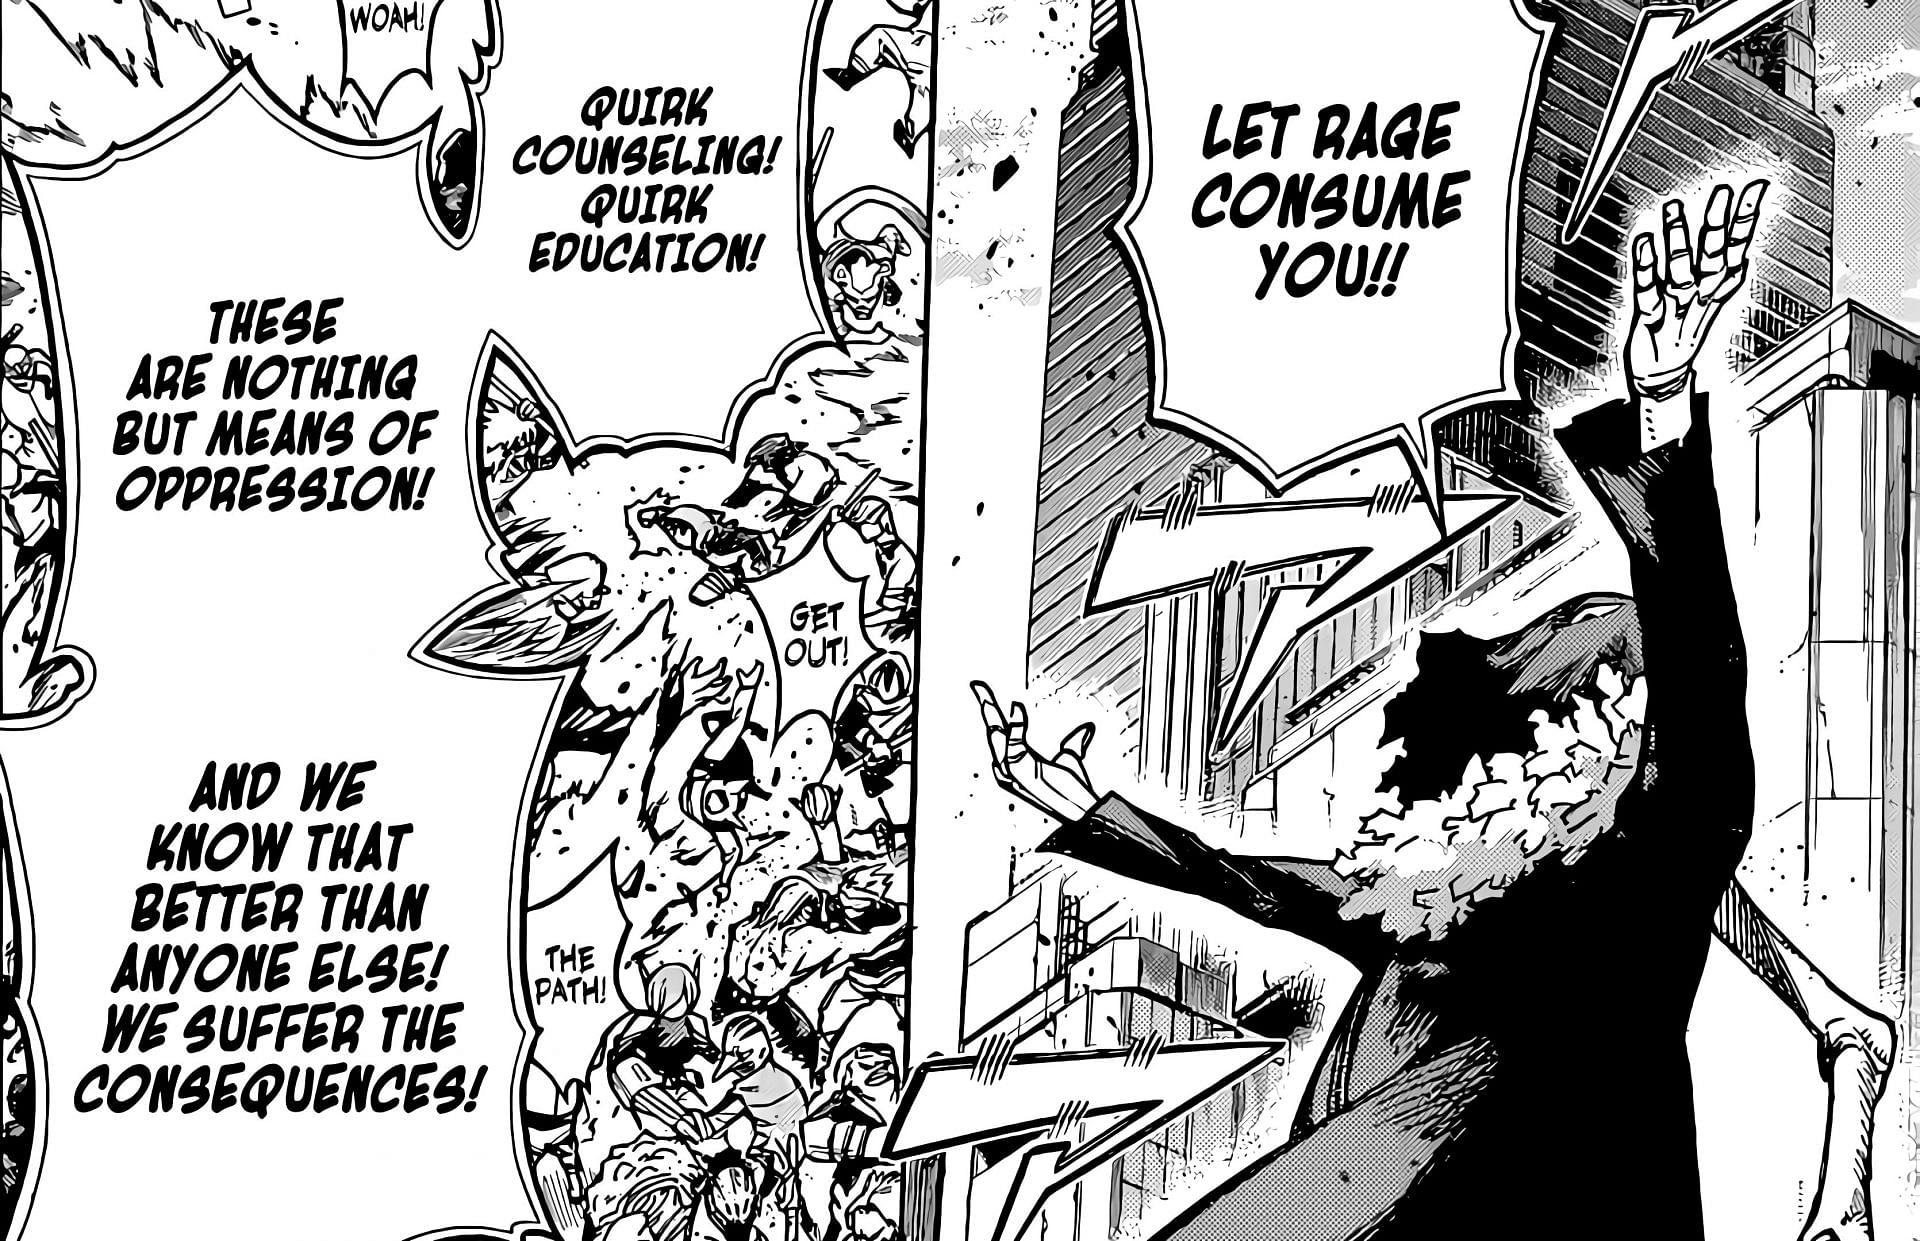 The Paranormal Liberation Front General in My Hero Academia chapter 370 (Image via Shueisha)